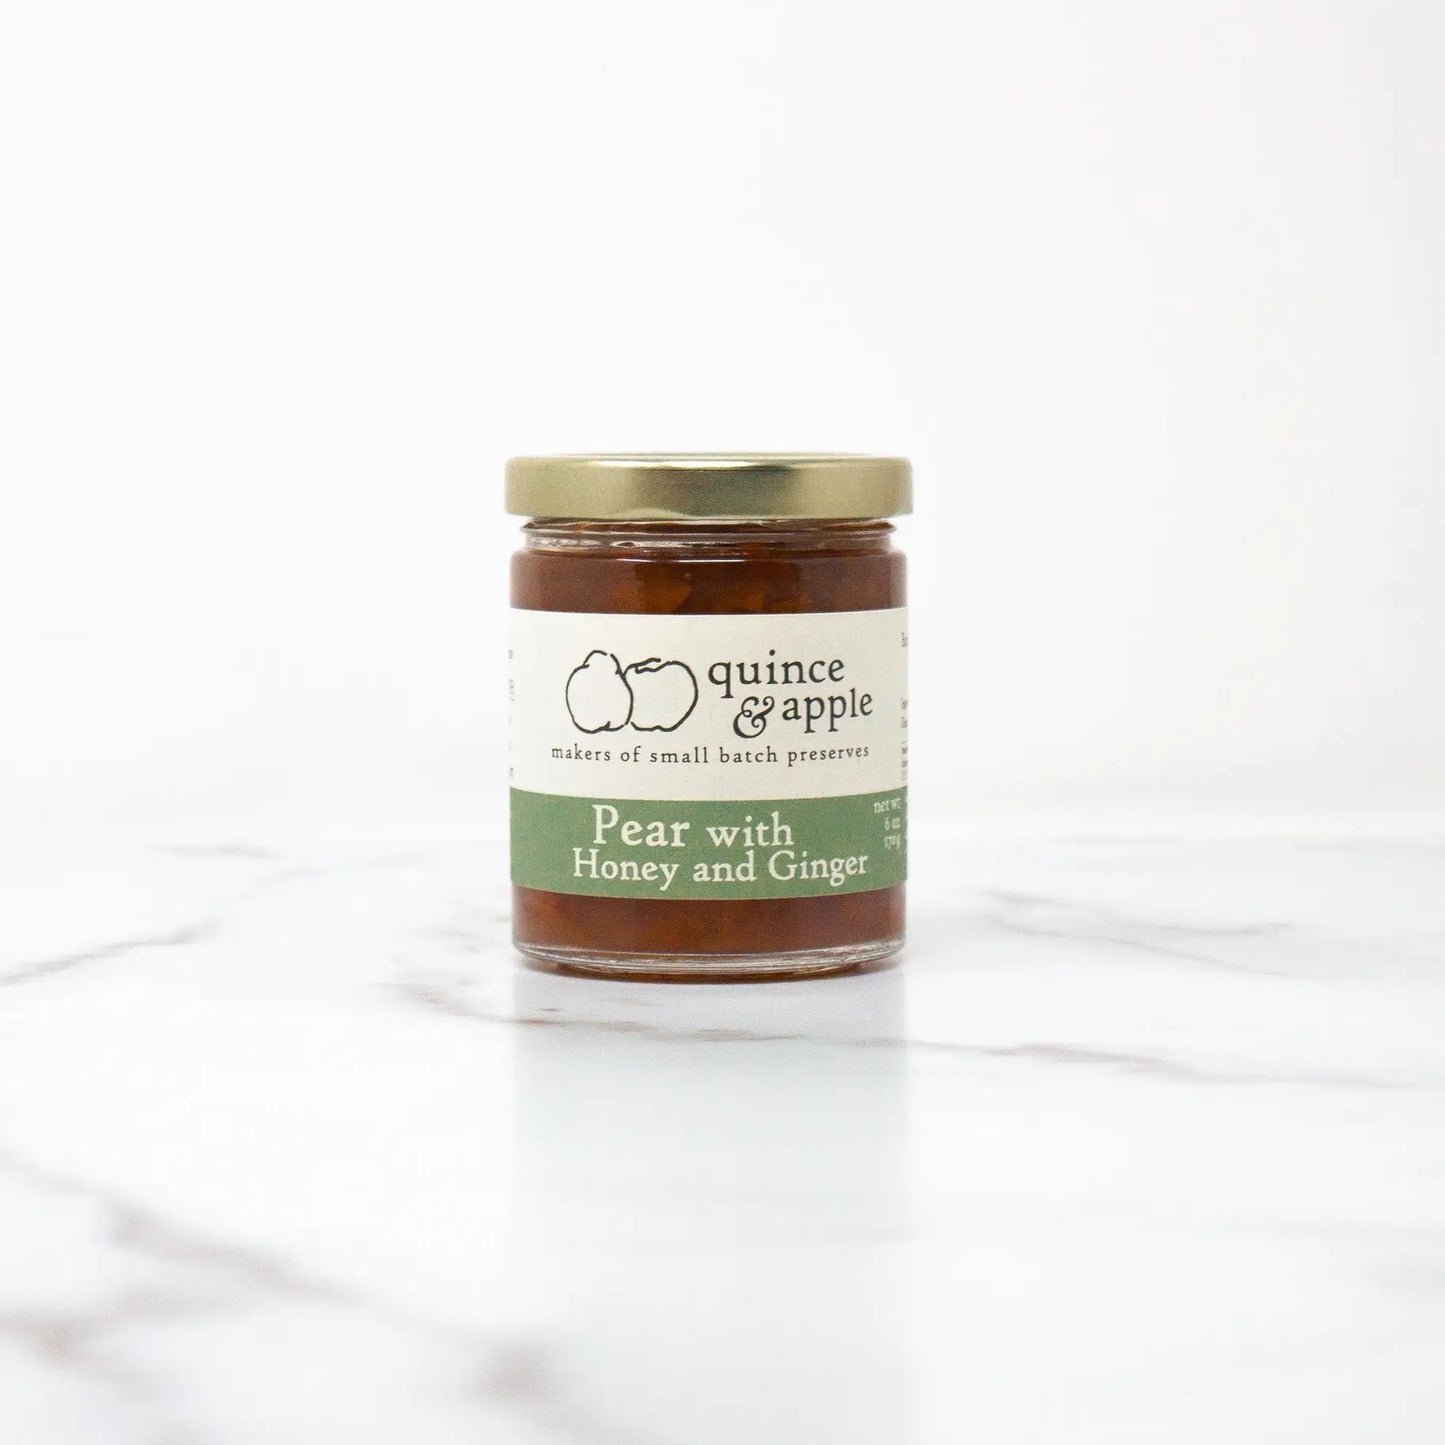 Quince Pear with Honey and Ginger Preserve, 170g/6oz